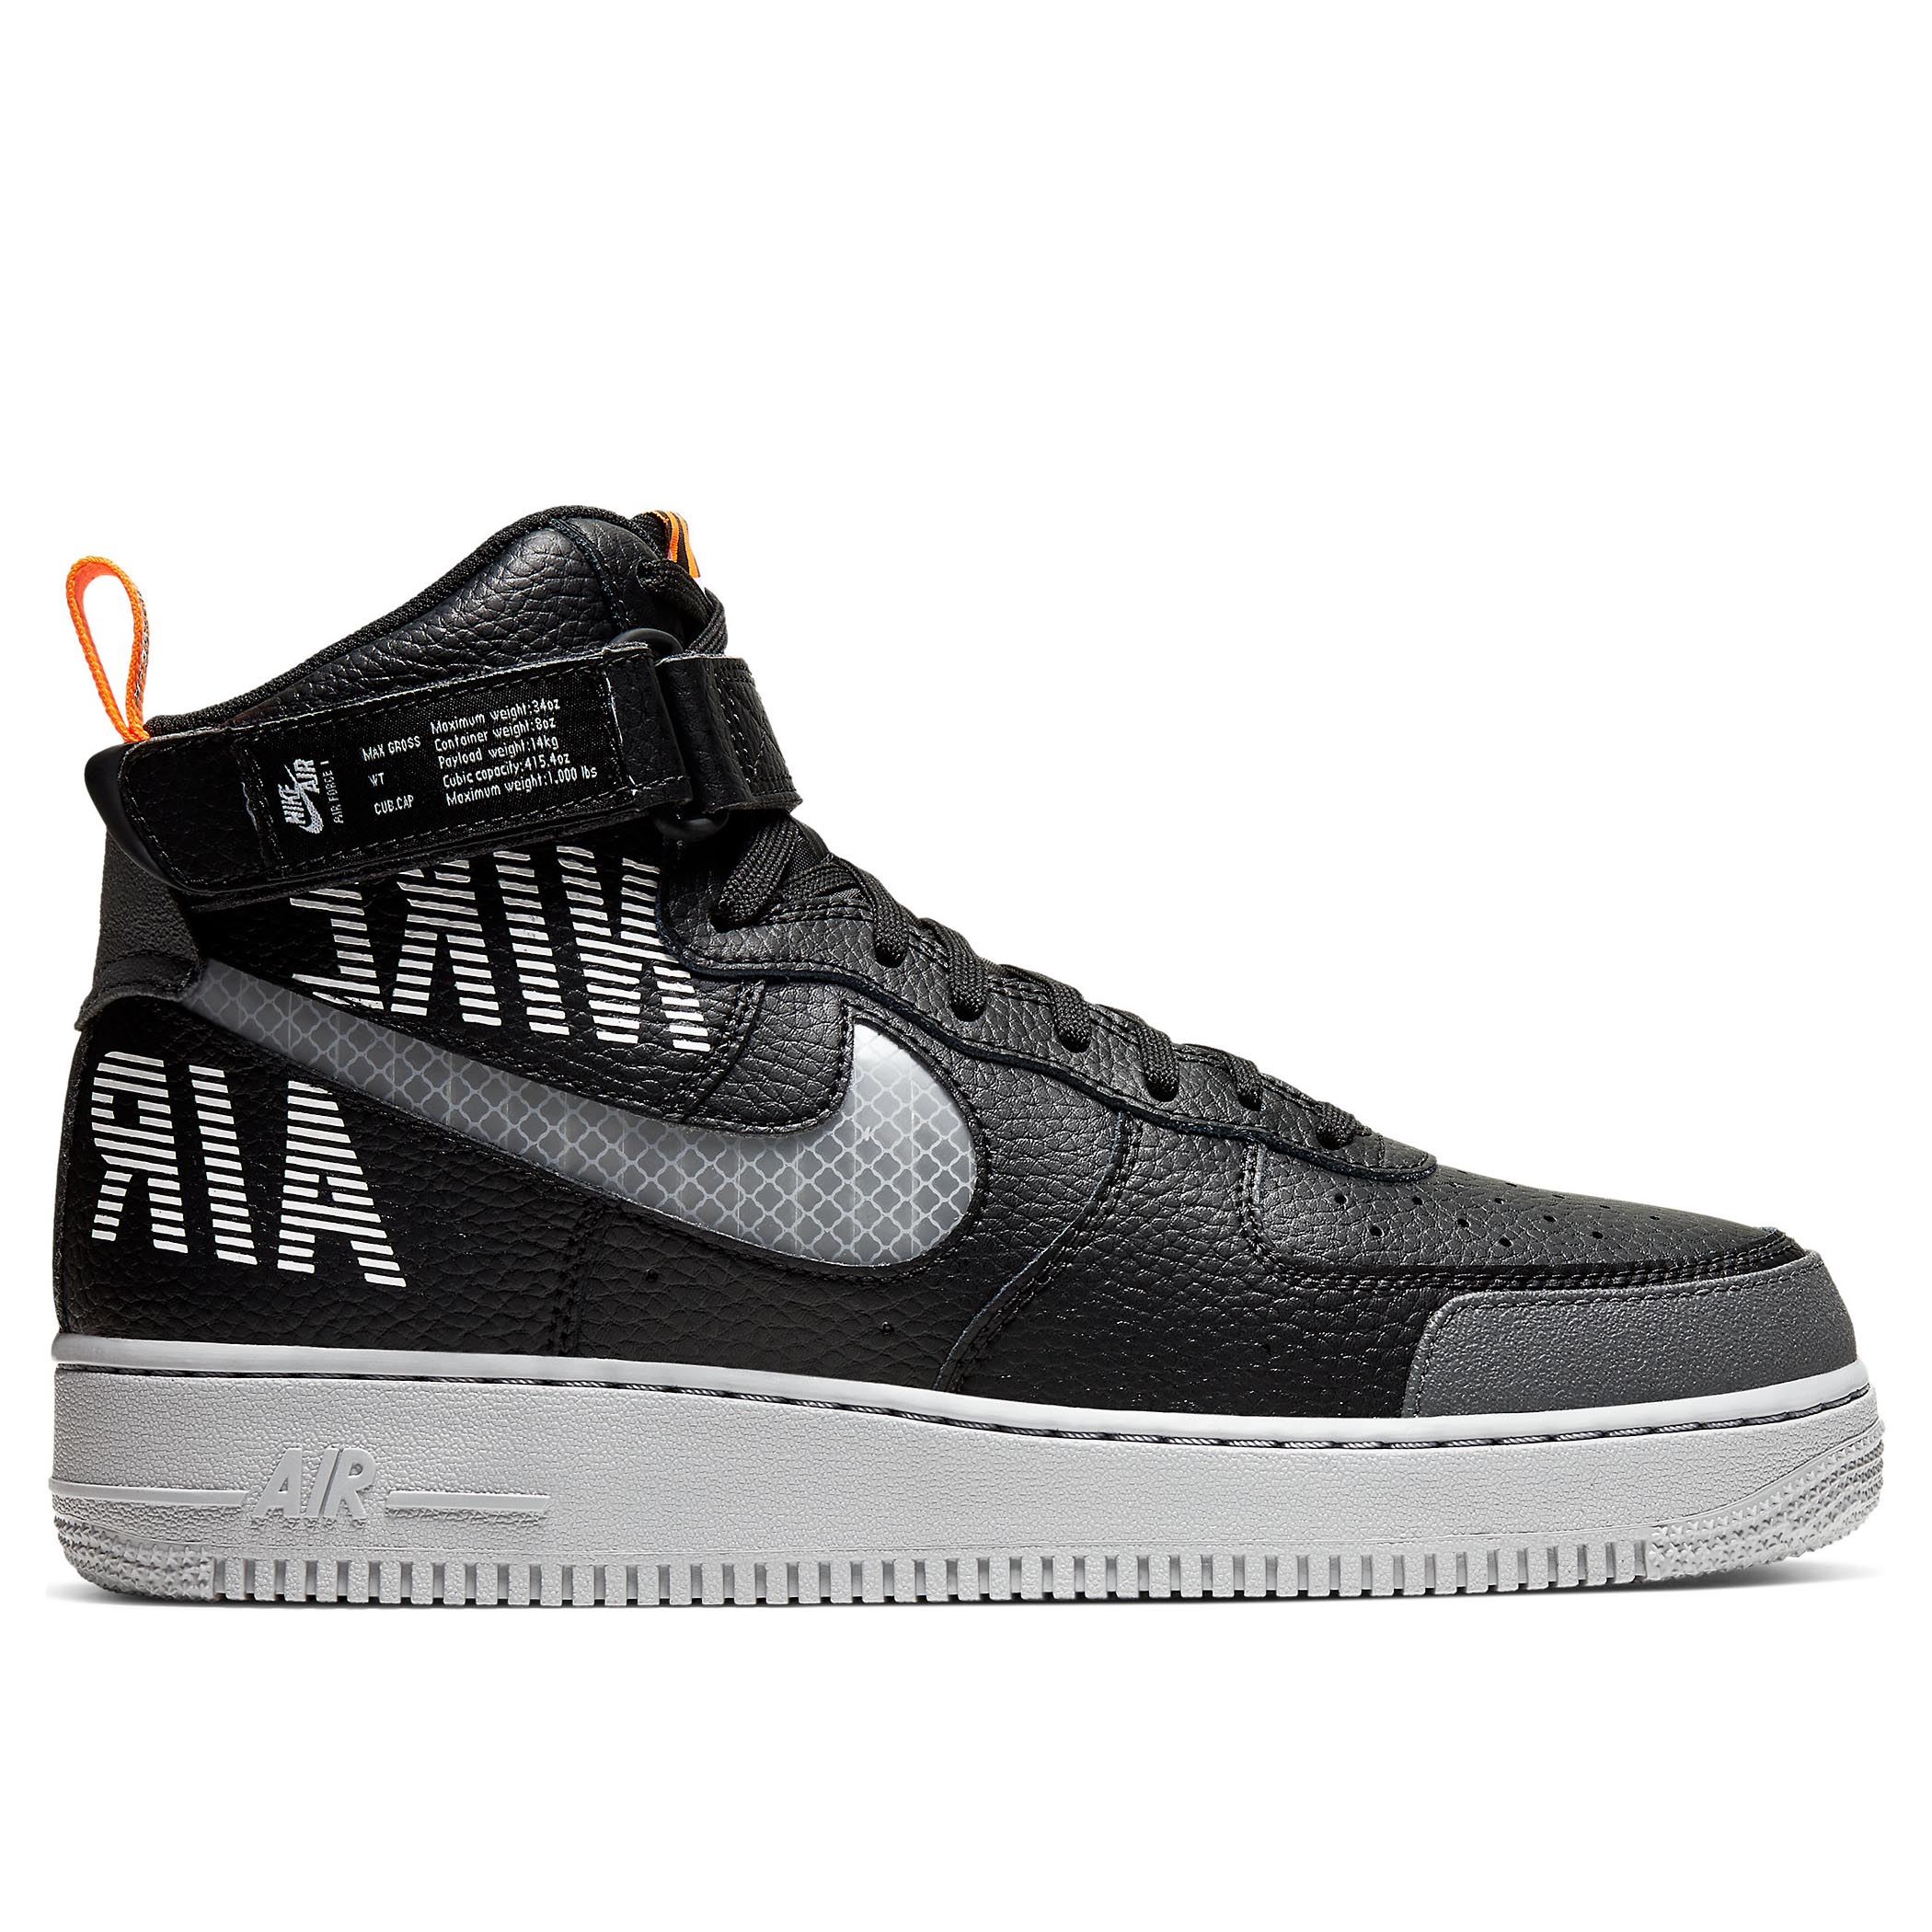 nike air force 1 weight in lbs